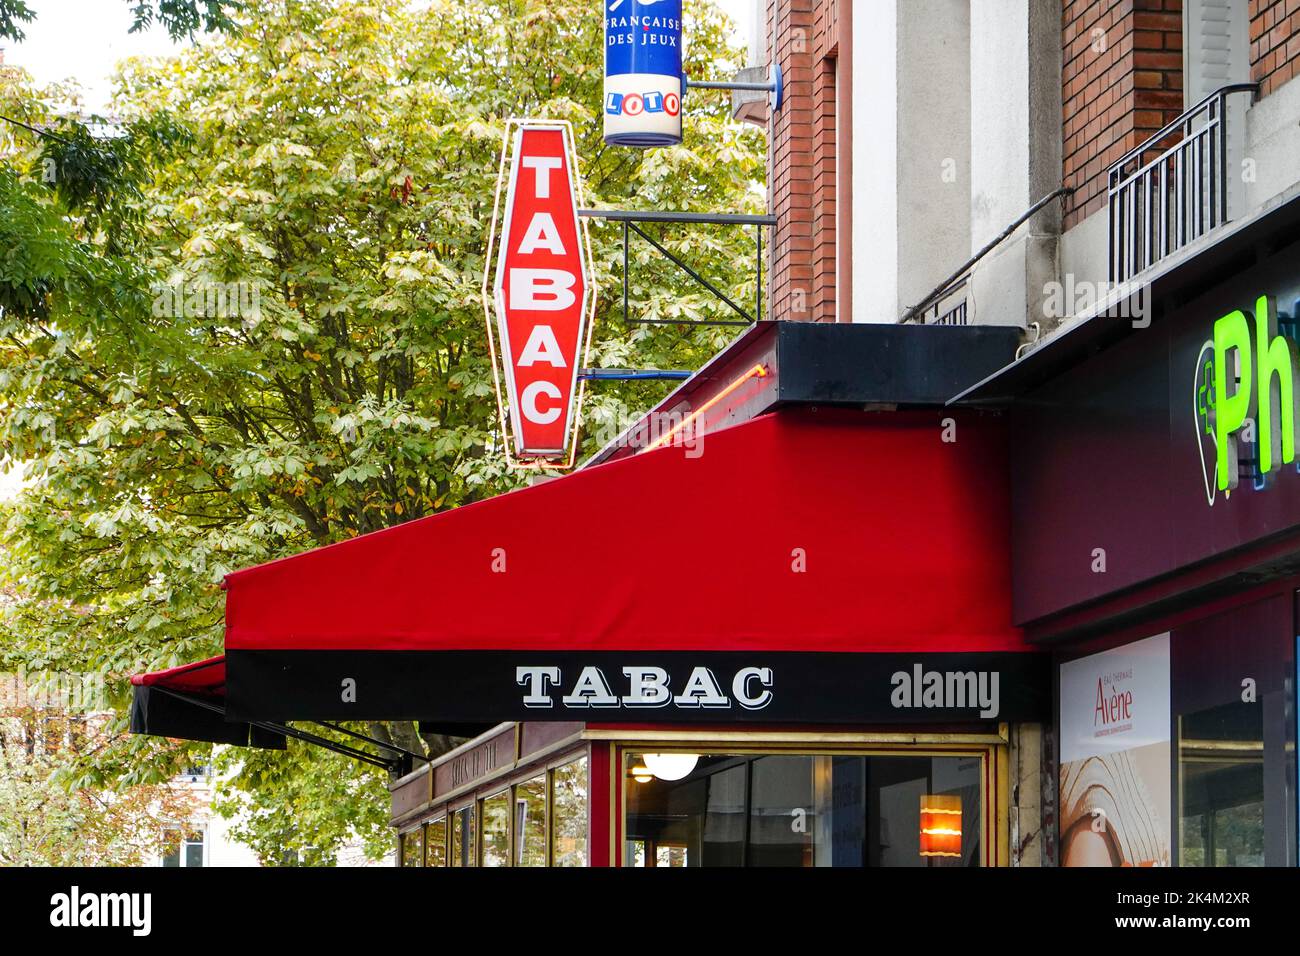 Café-tabac, bar, cafe, also selling cigarettes, lottery tickets and sometimes stamps, notable by the red diamond-shaped sign outside, Paris, France. Stock Photo